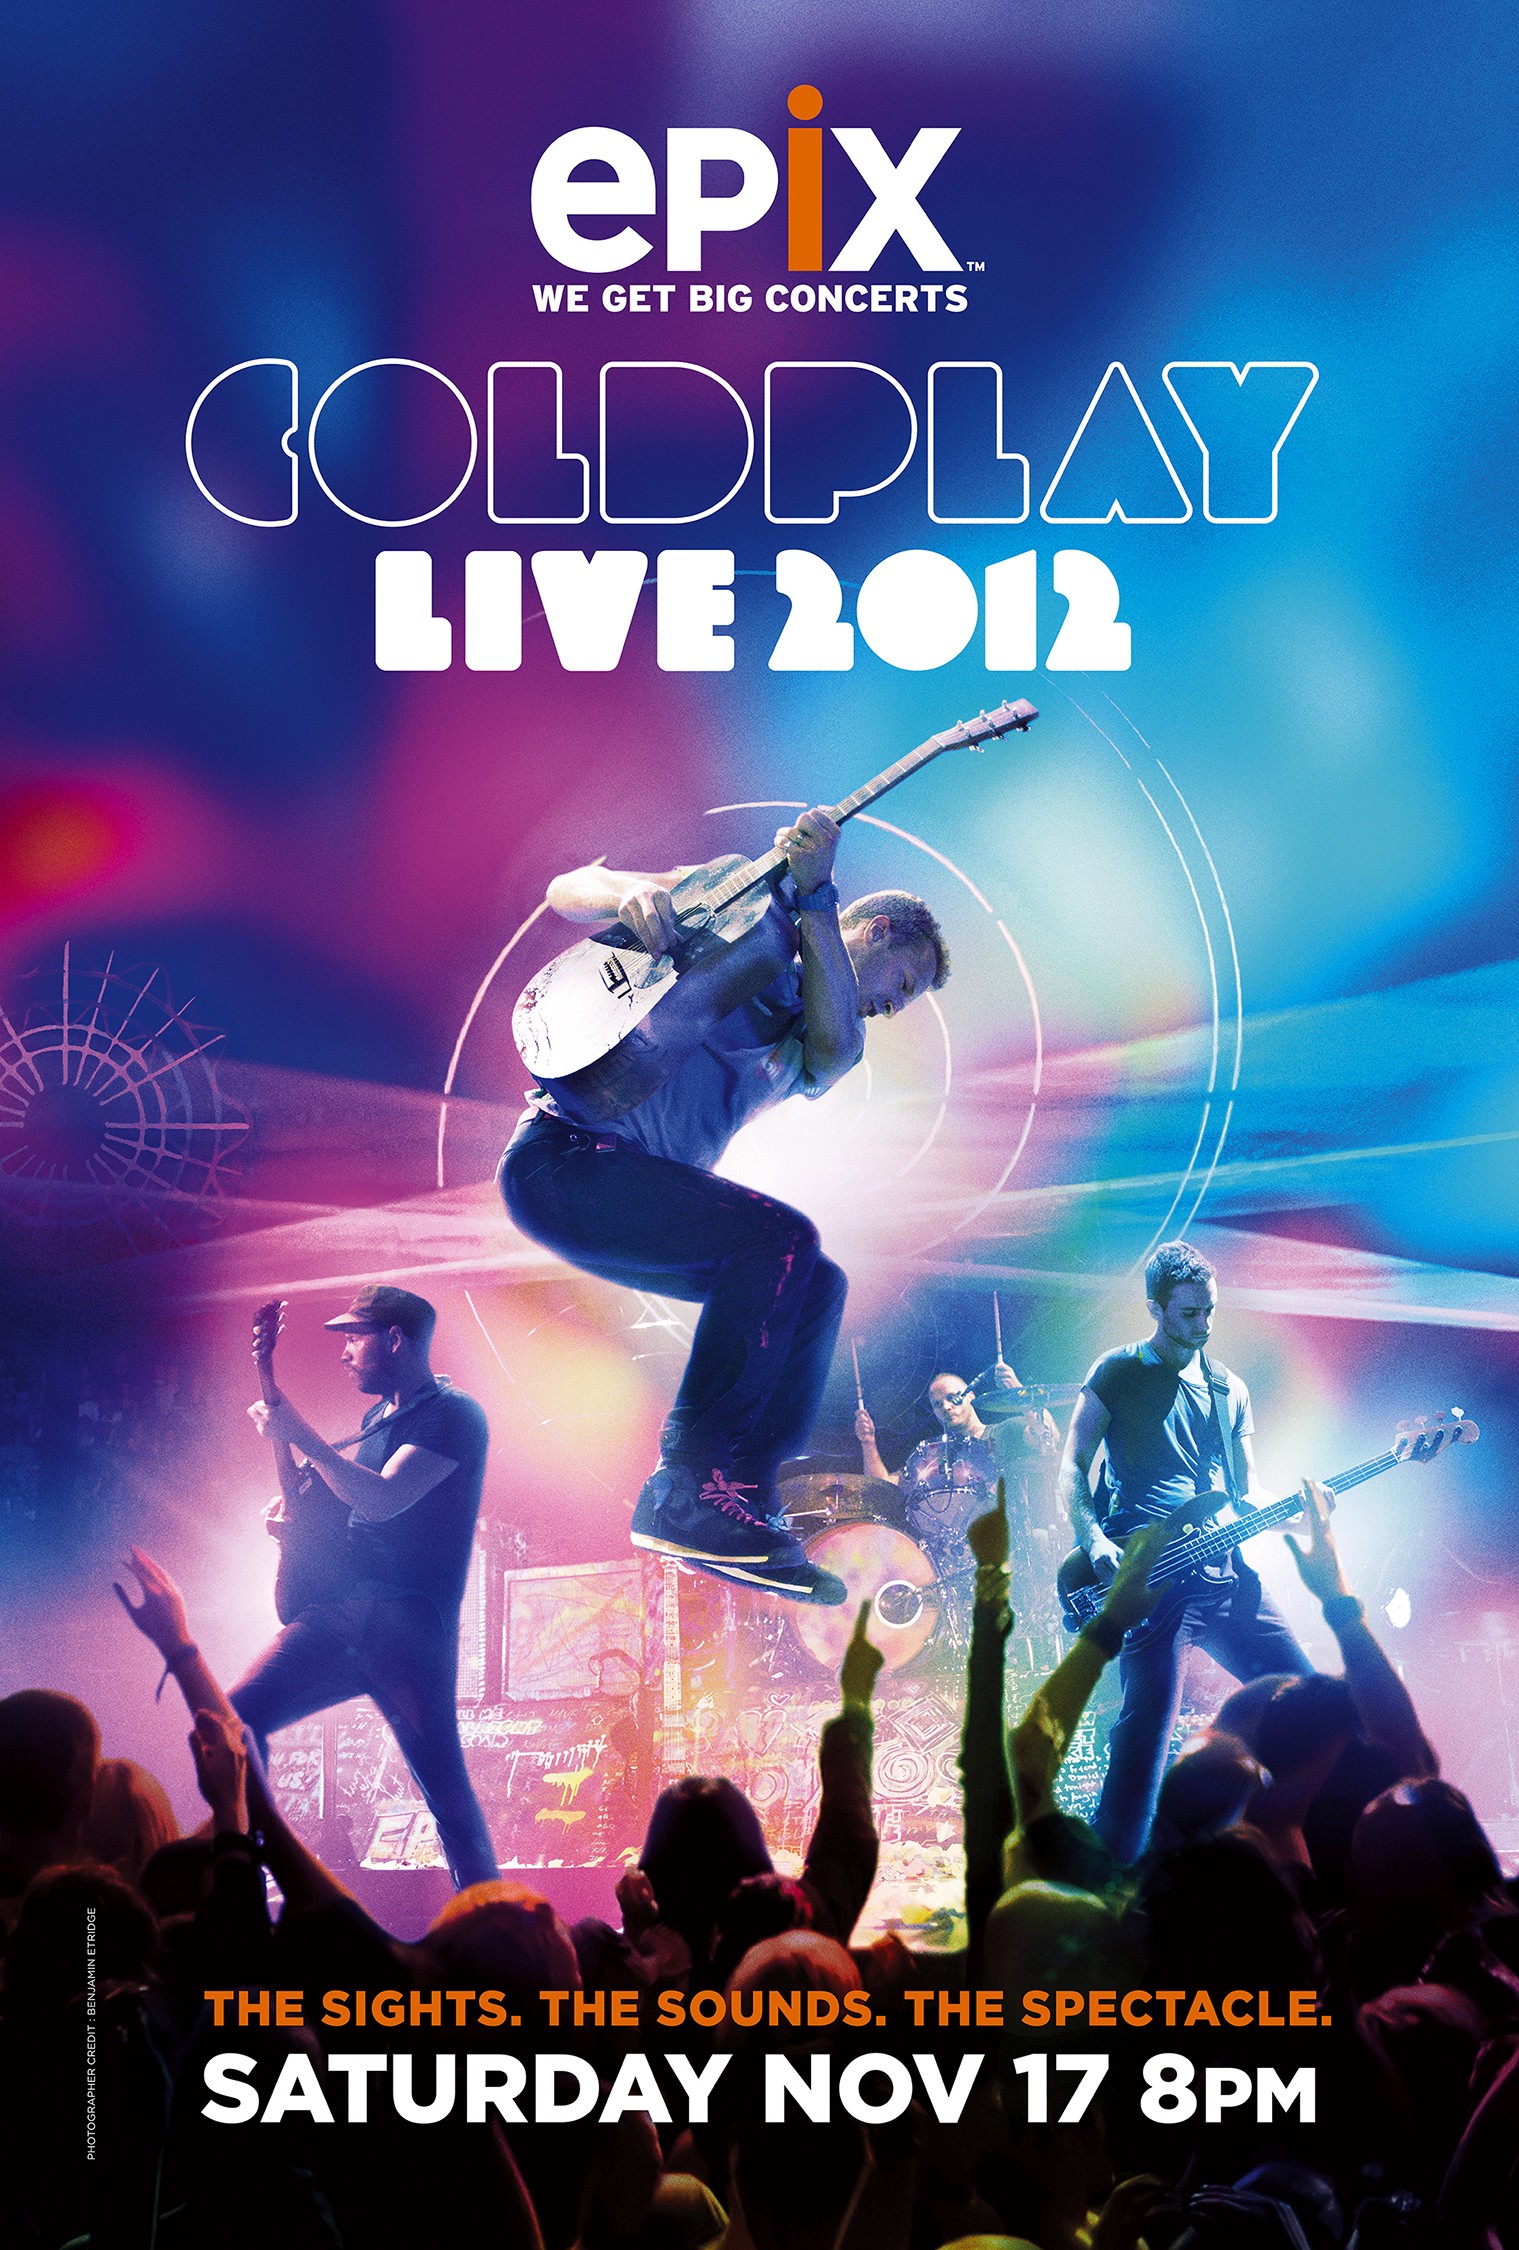 Mega Sized TV Poster Image for Coldplay Live 2012 